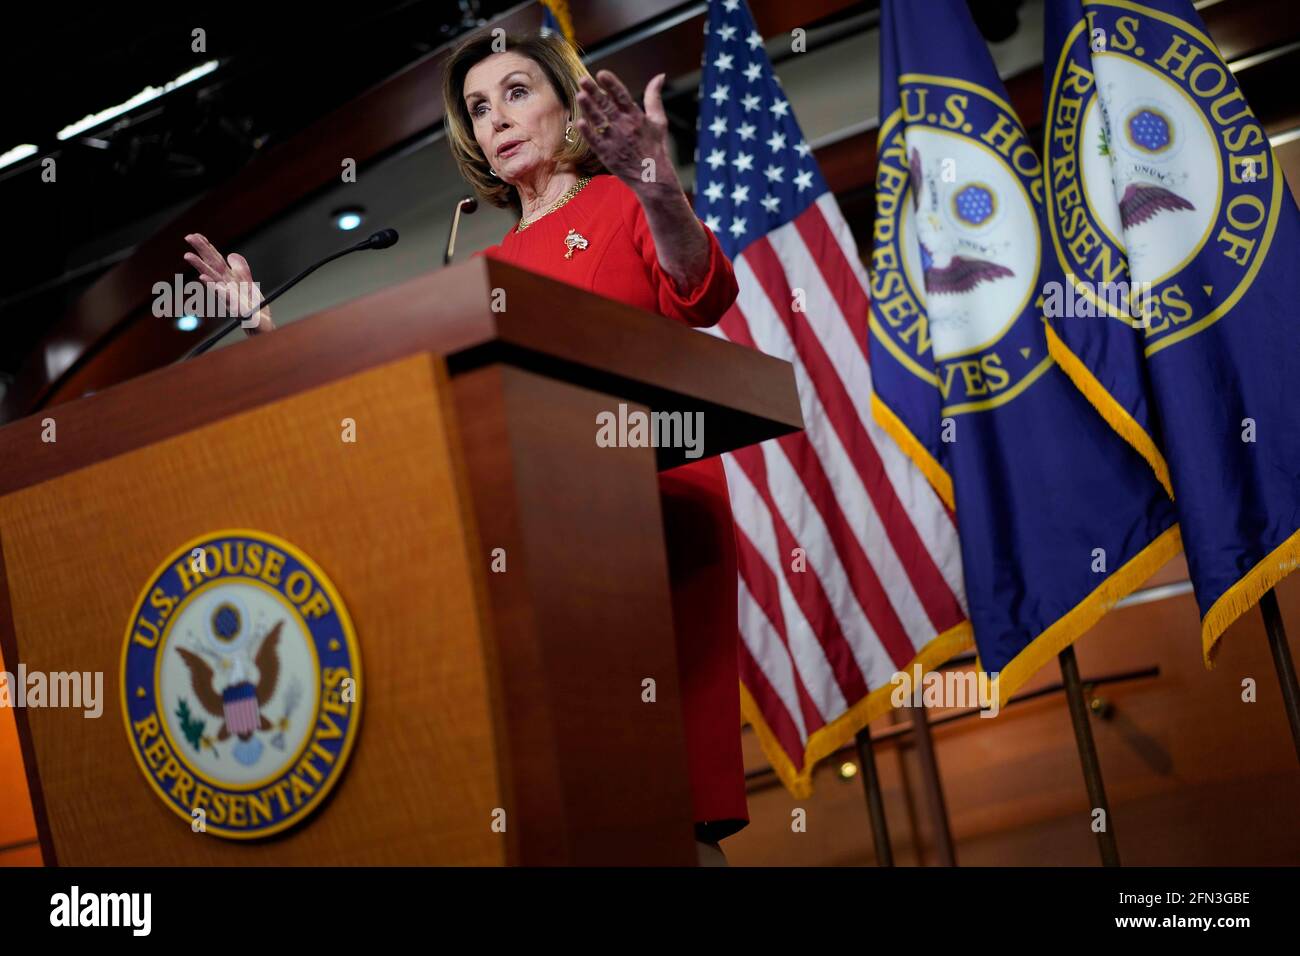 Washington, USA. 13th May, 2021. U.S. House Speaker Nancy Pelosi speaks during her weekly press conference on Capitol Hill in Washington, DC, the United States, on May 13, 2021. Credit: Ting Shen/Xinhua/Alamy Live News Stock Photo